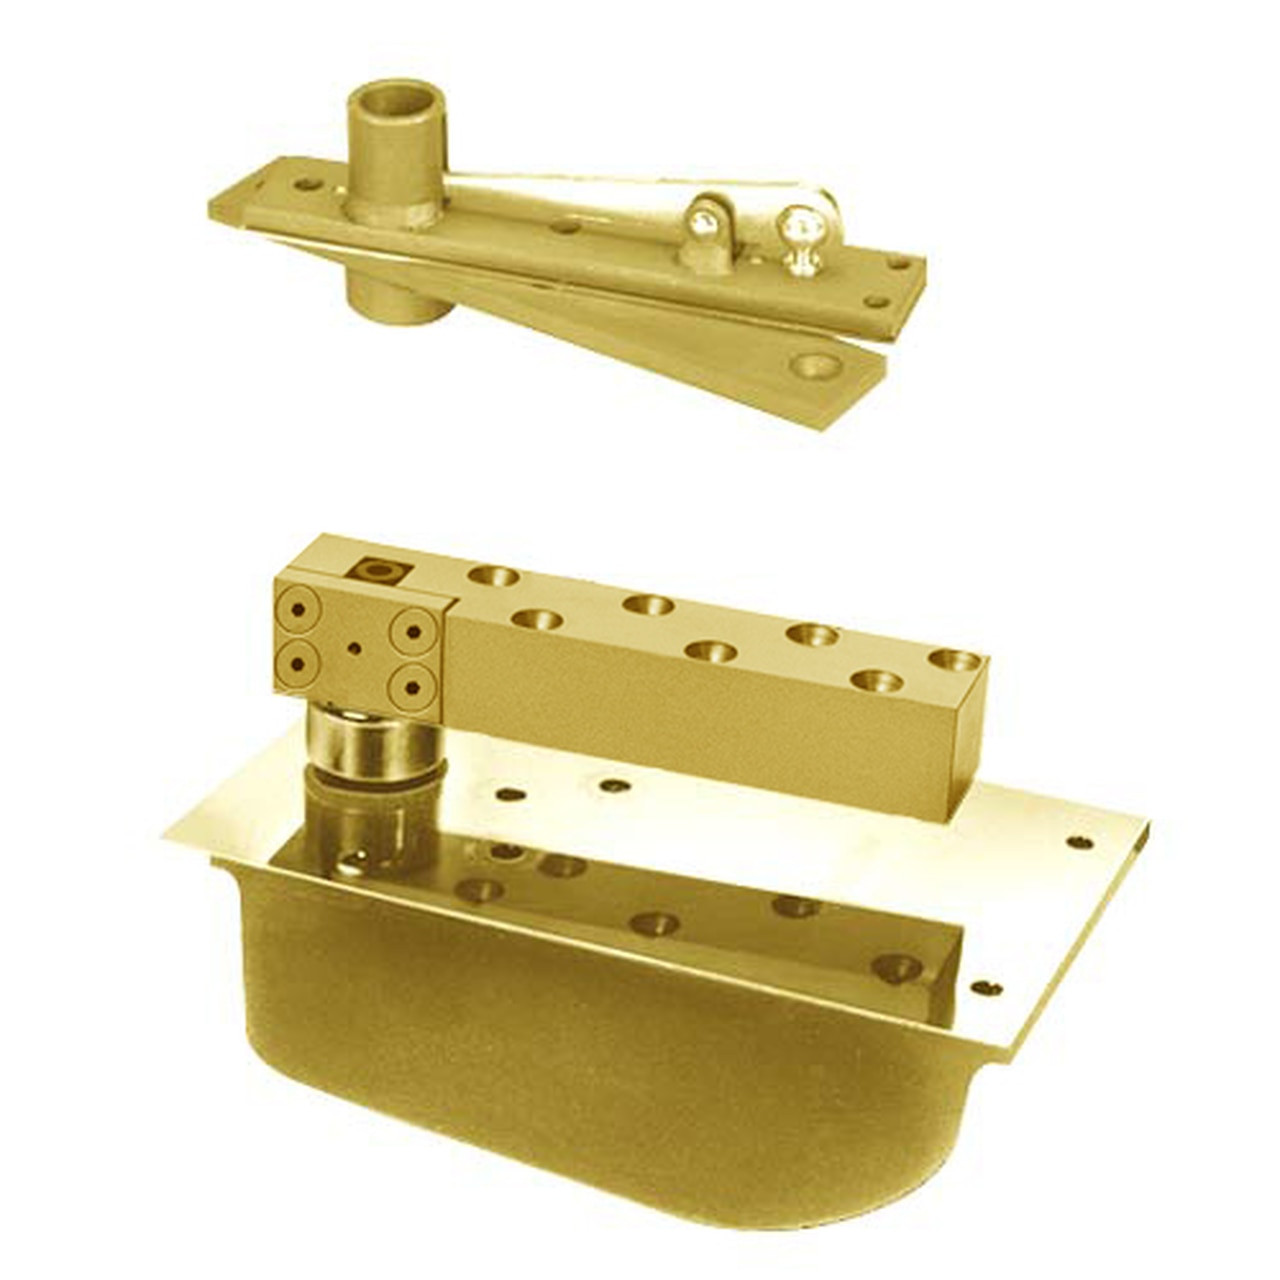 H28-90N-587-LCC-LH-605 Rixson 28 Series Extra Heavy Duty Single Acting Center Hung Concealed Floor Closer in Bright Brass Finish